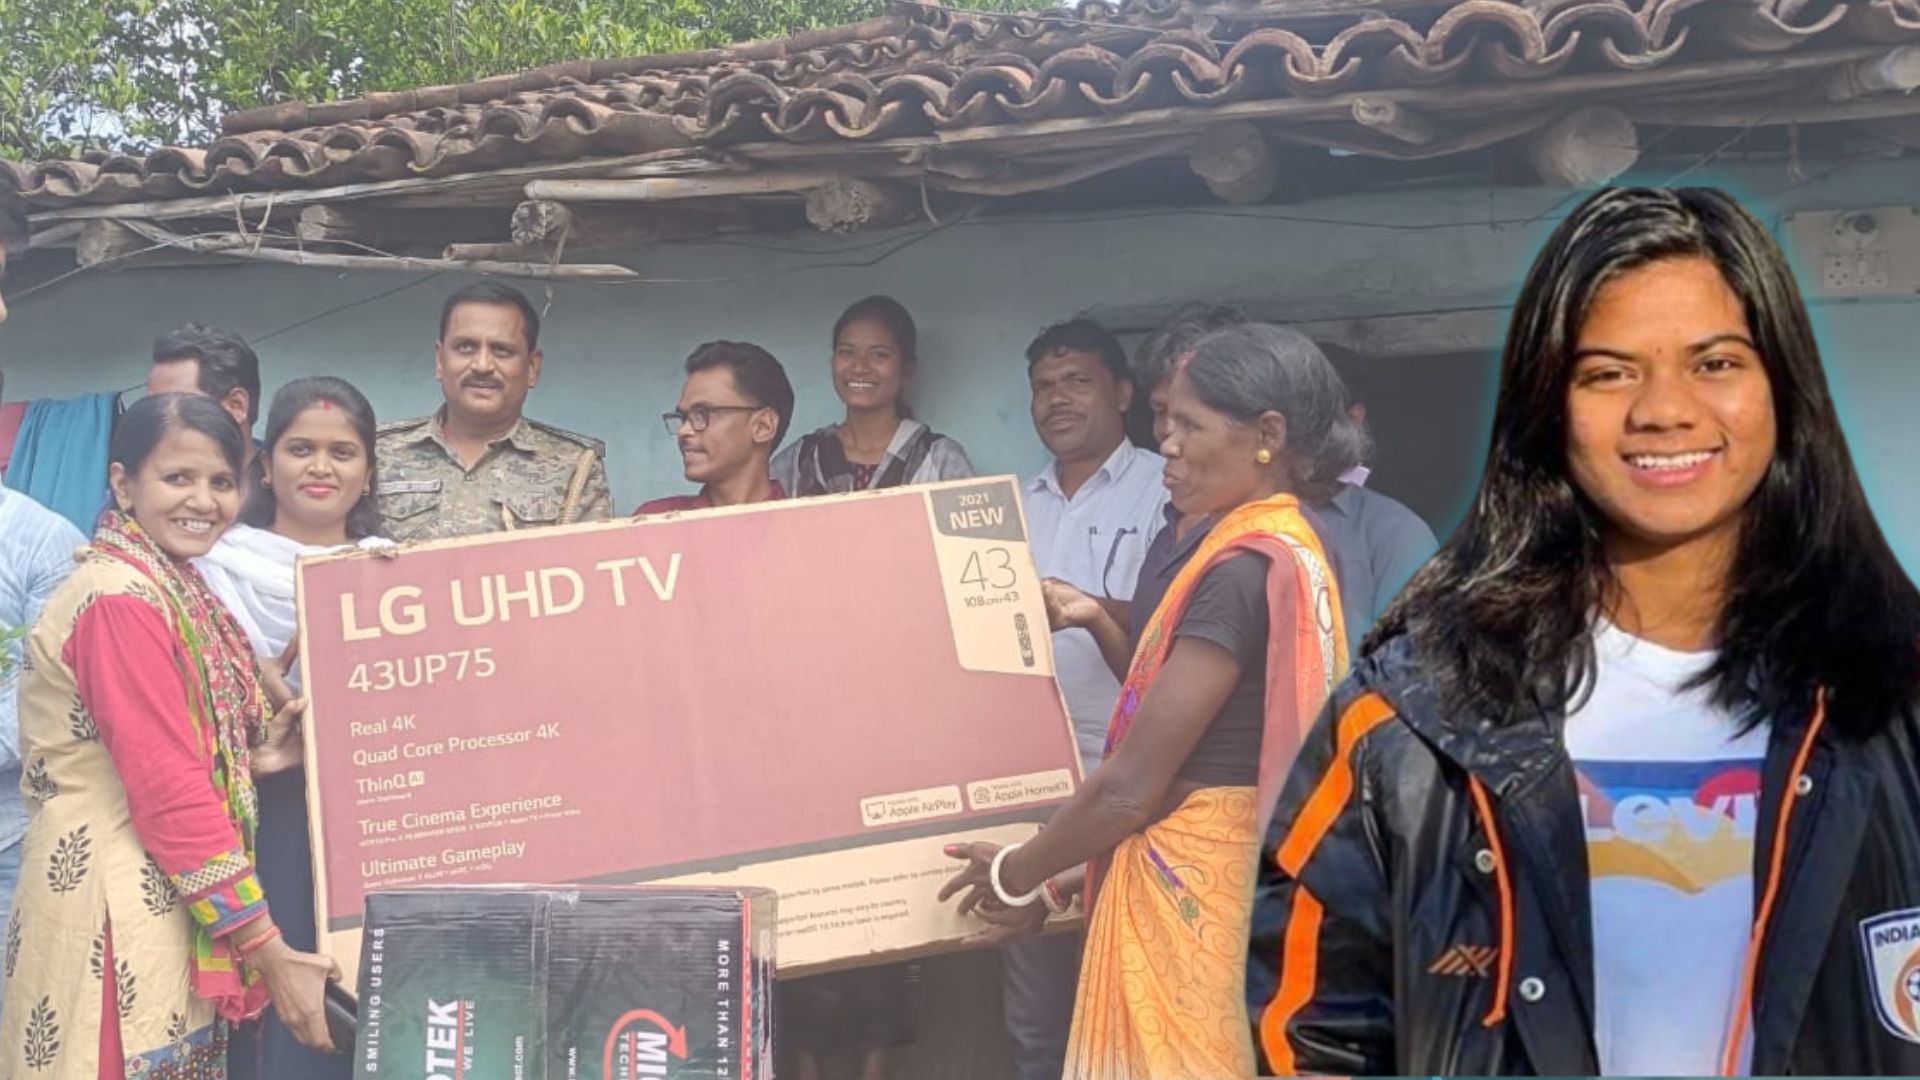 The Jharkhand Government Gifts A TV Set To Astam Oraon’s Family So They Watch Watch Their Daughter Lead Women’s U-17 Team In Fifa World Cup